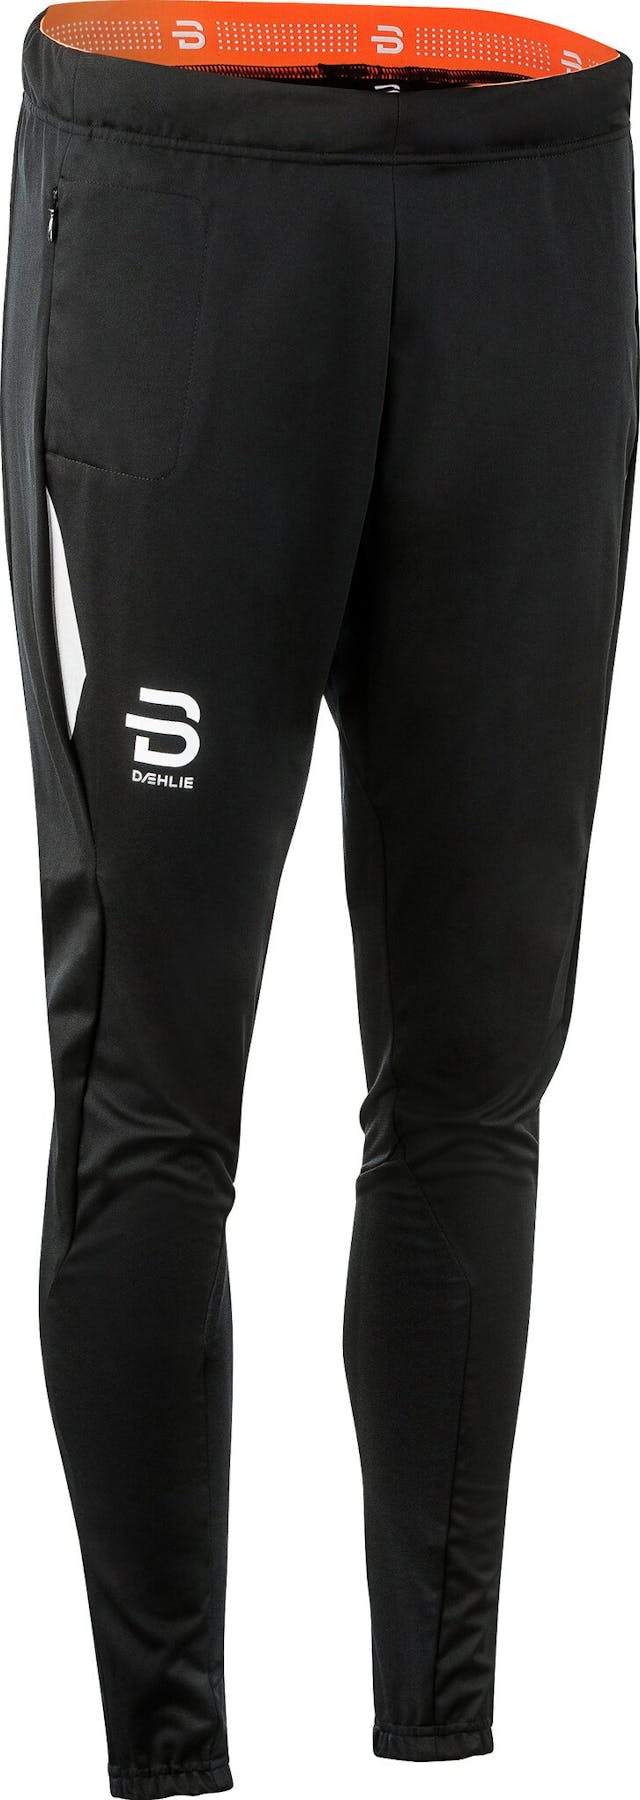 Product image for Pro Pants - Women's